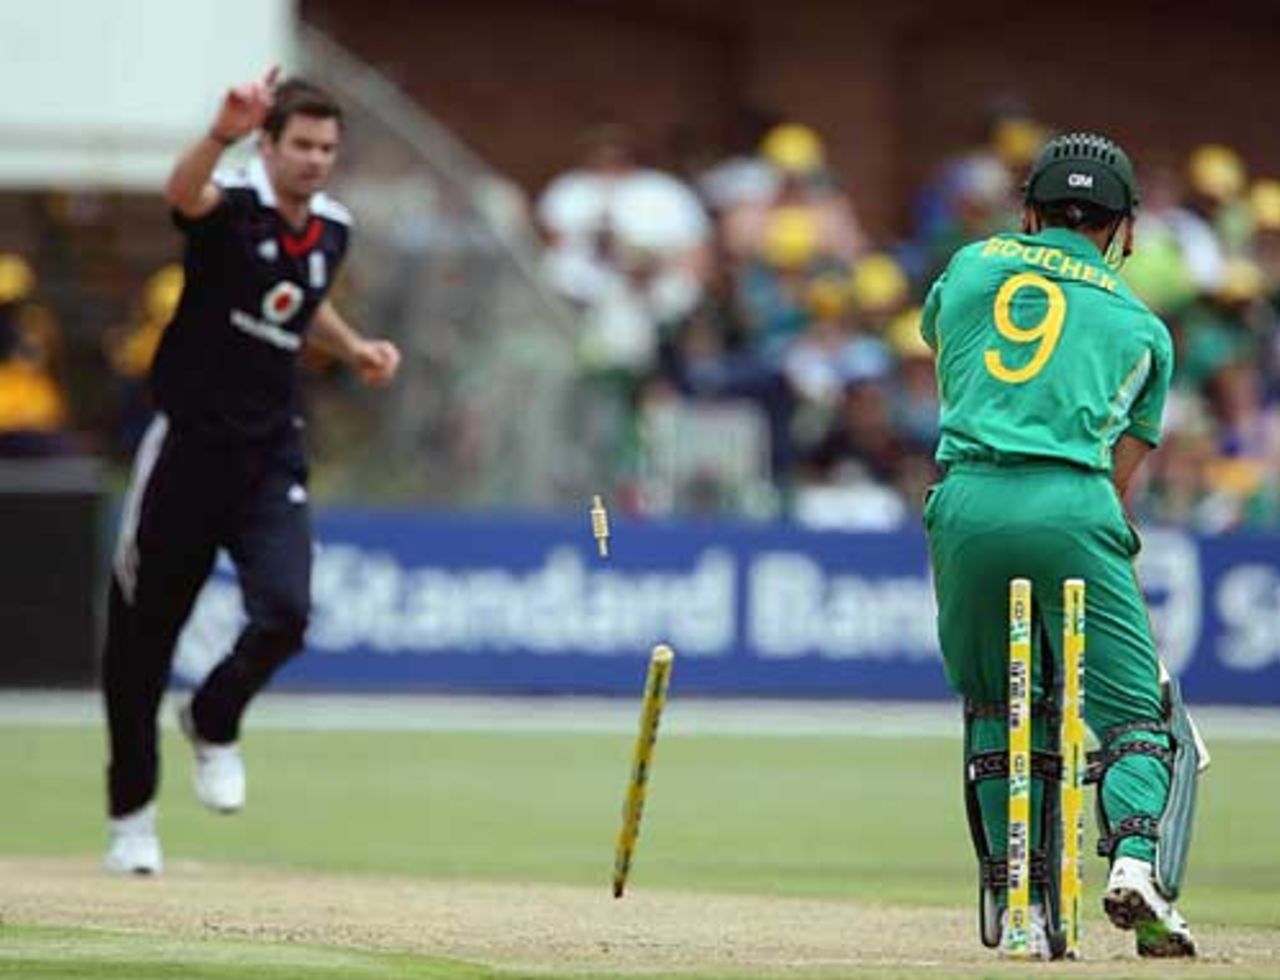 Mark Boucher was bowled by a beautiful delivery from James Anderson that squared him up, South Africa v England, 4th ODI, Port Elizabeth, November 29, 2009